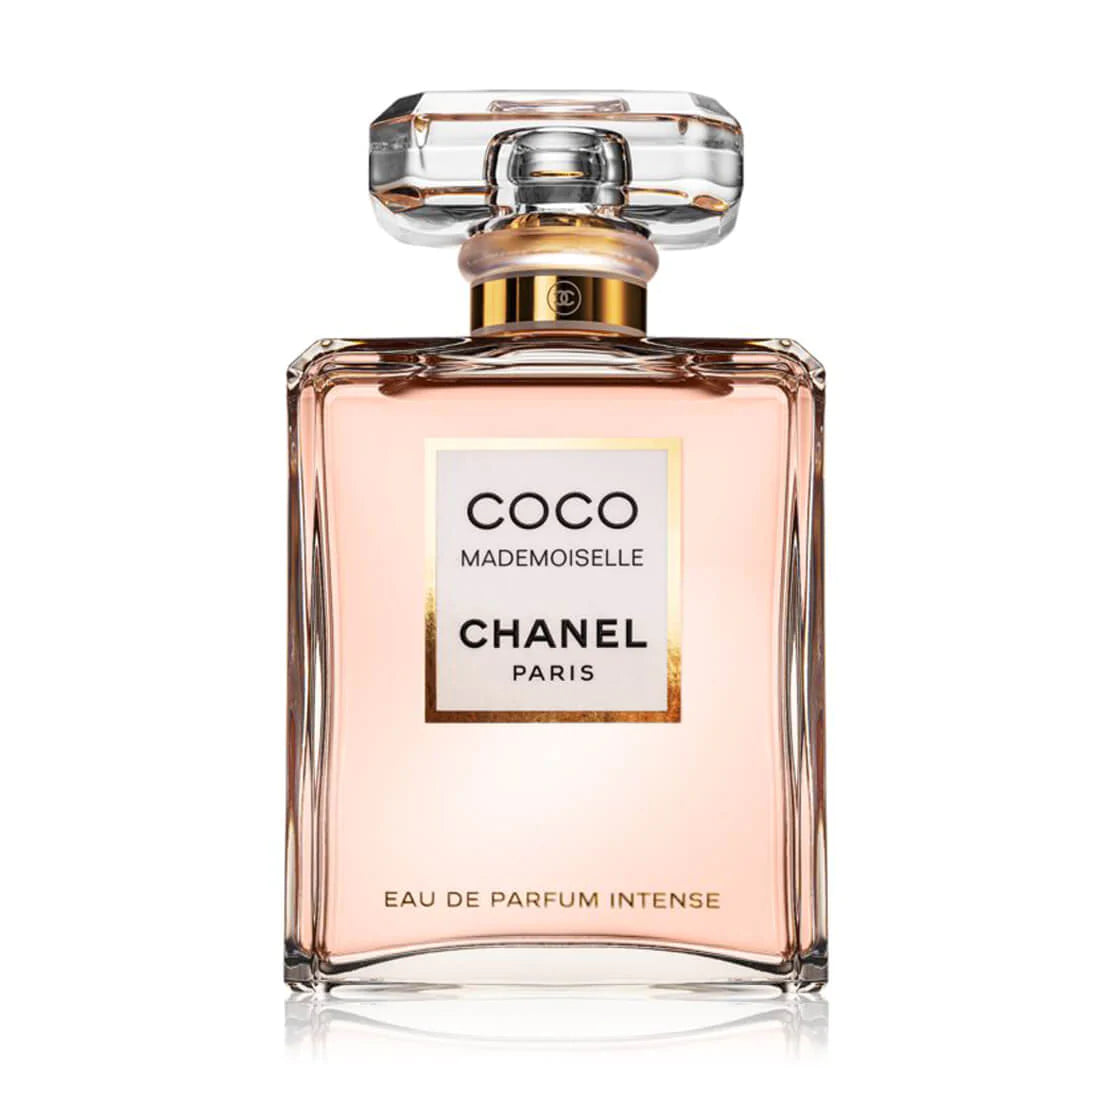 COCO MADEMOISELLE INTENSE Review  Better Than The Original? 